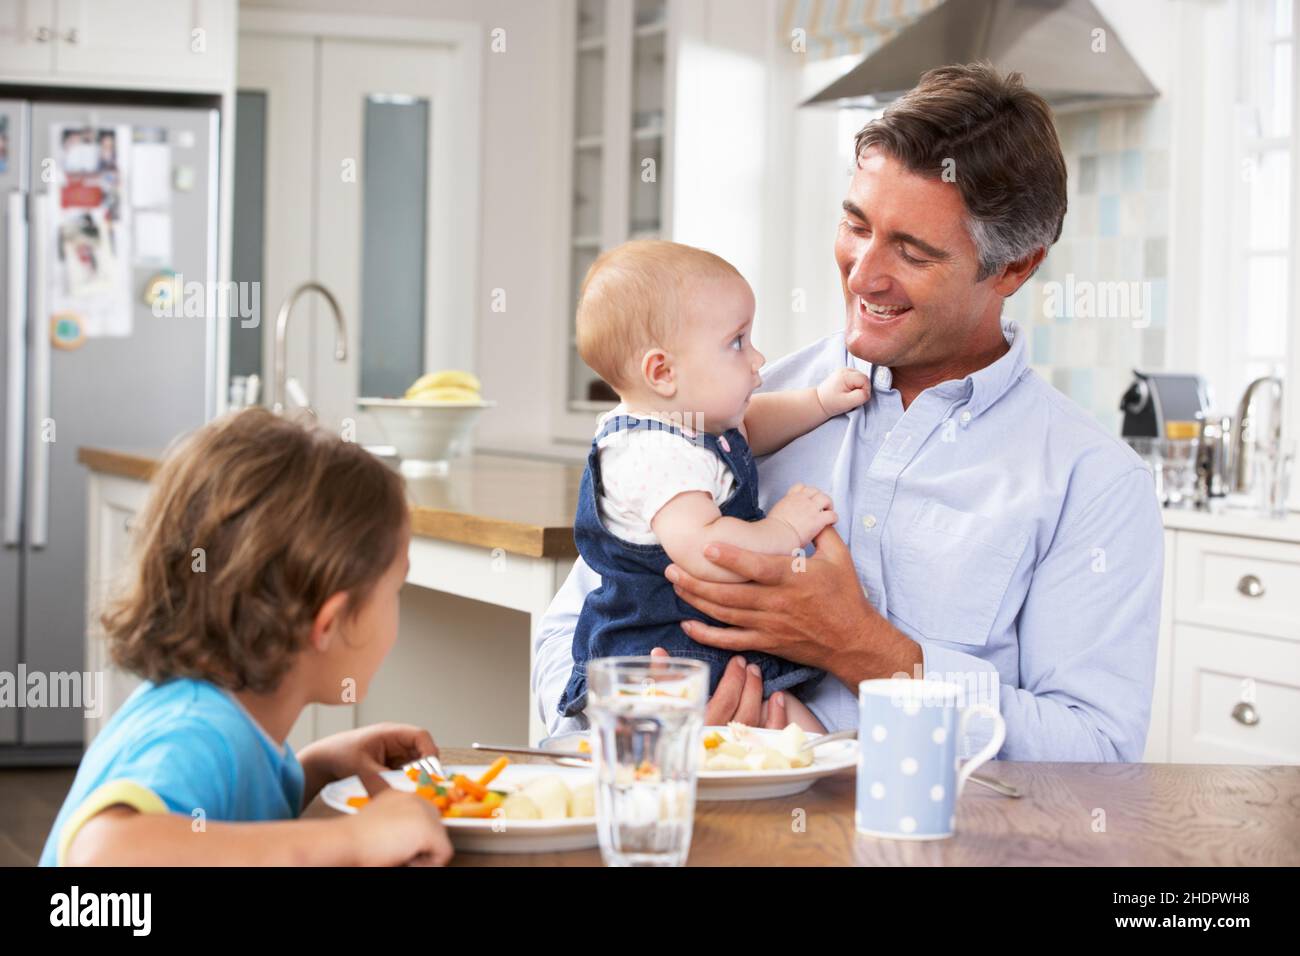 father, parental leave, paternity leave, dad, fathers, parental leaves Stock Photo